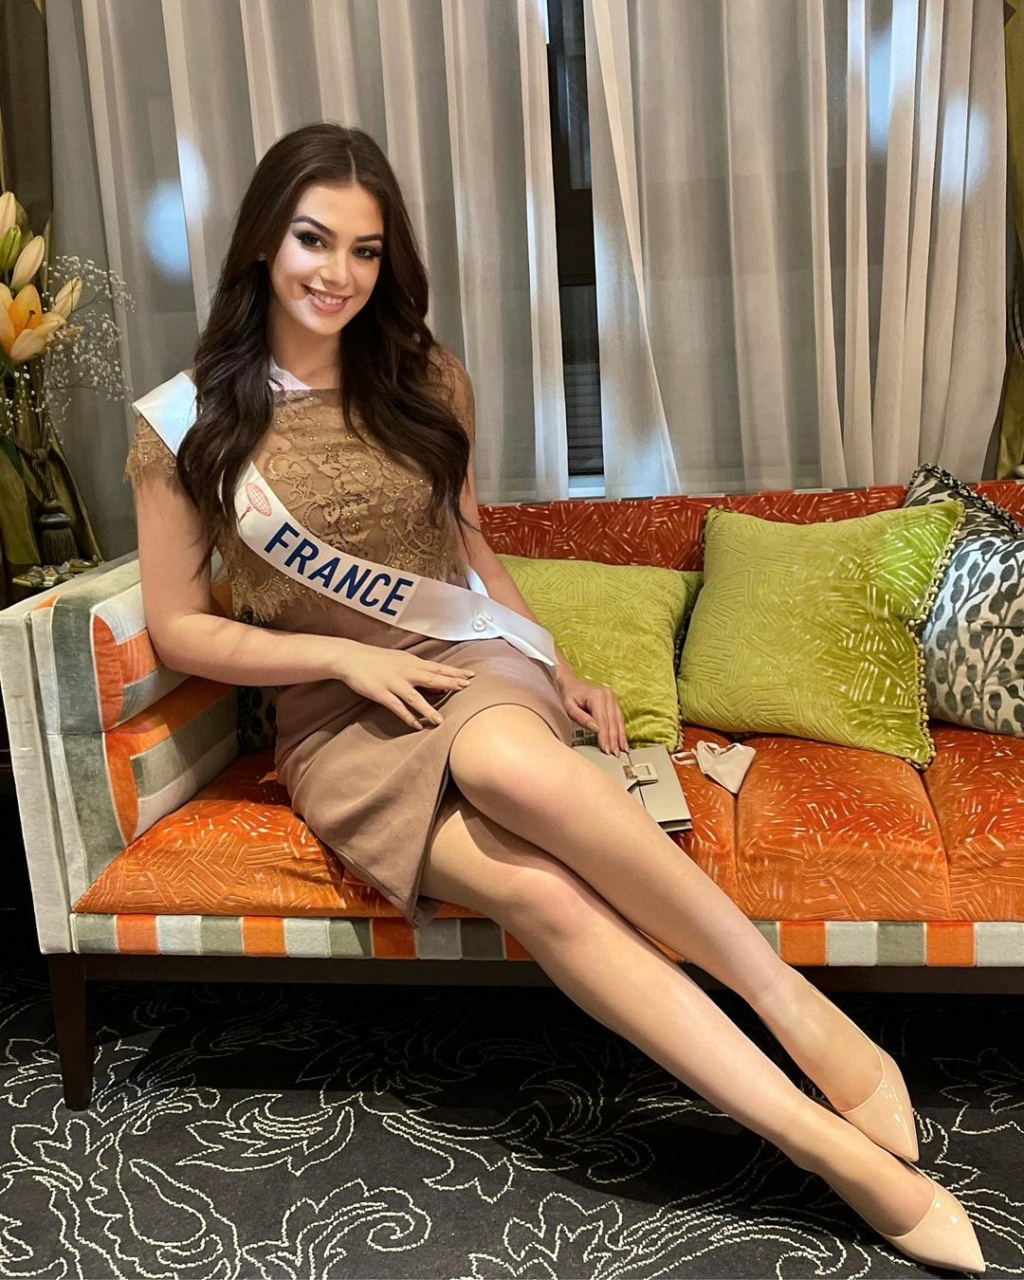 ♔♔♔♔♔ ROAD TO MISS INTERNATIONAL 2022 ♔♔♔♔♔ - Page 6 31766810